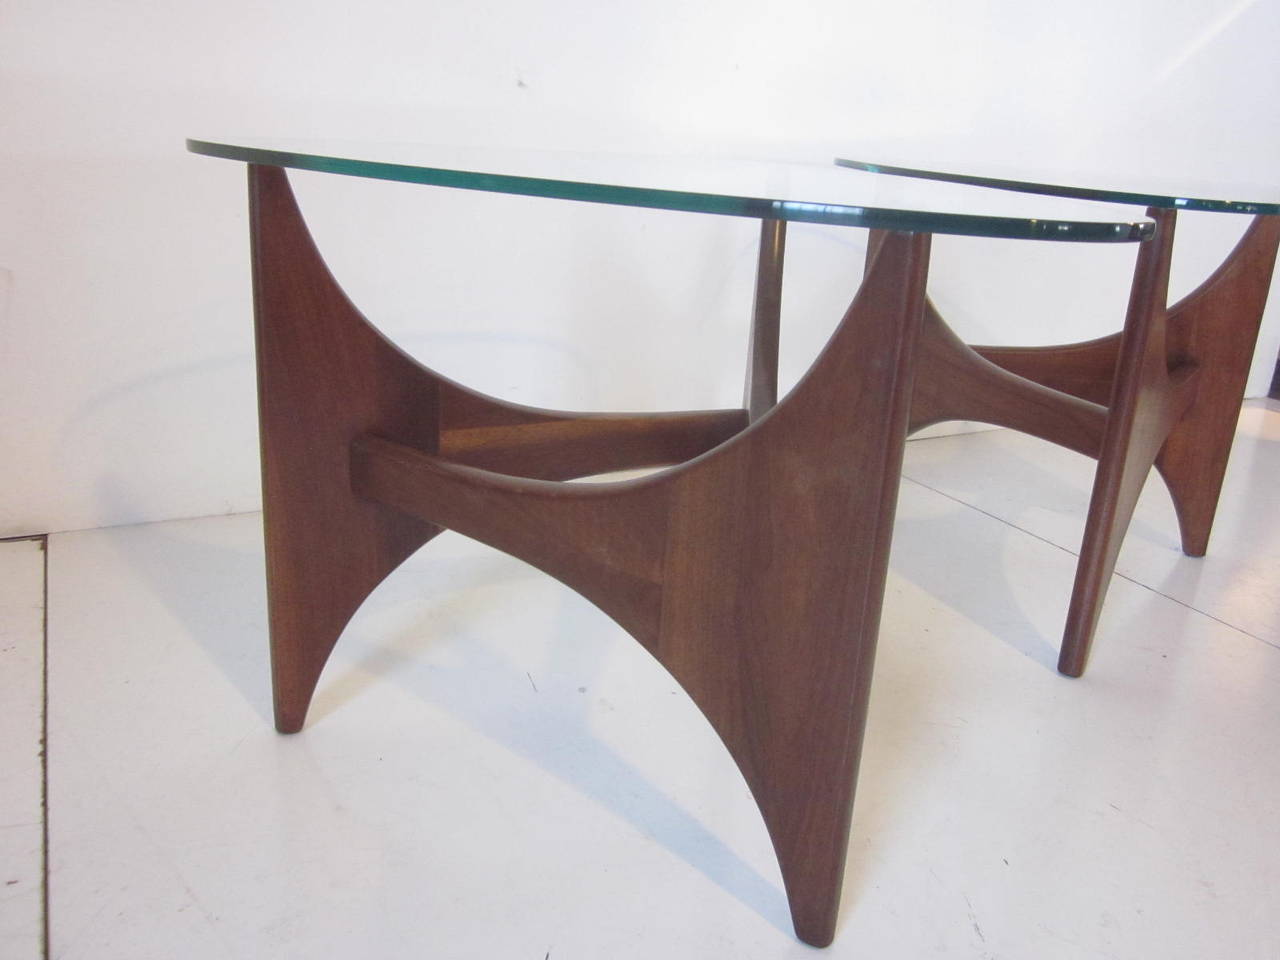 A matching pair of solid walnut sculptural side tables with triangle-shaped glass tops manufactured by Craft Associates.